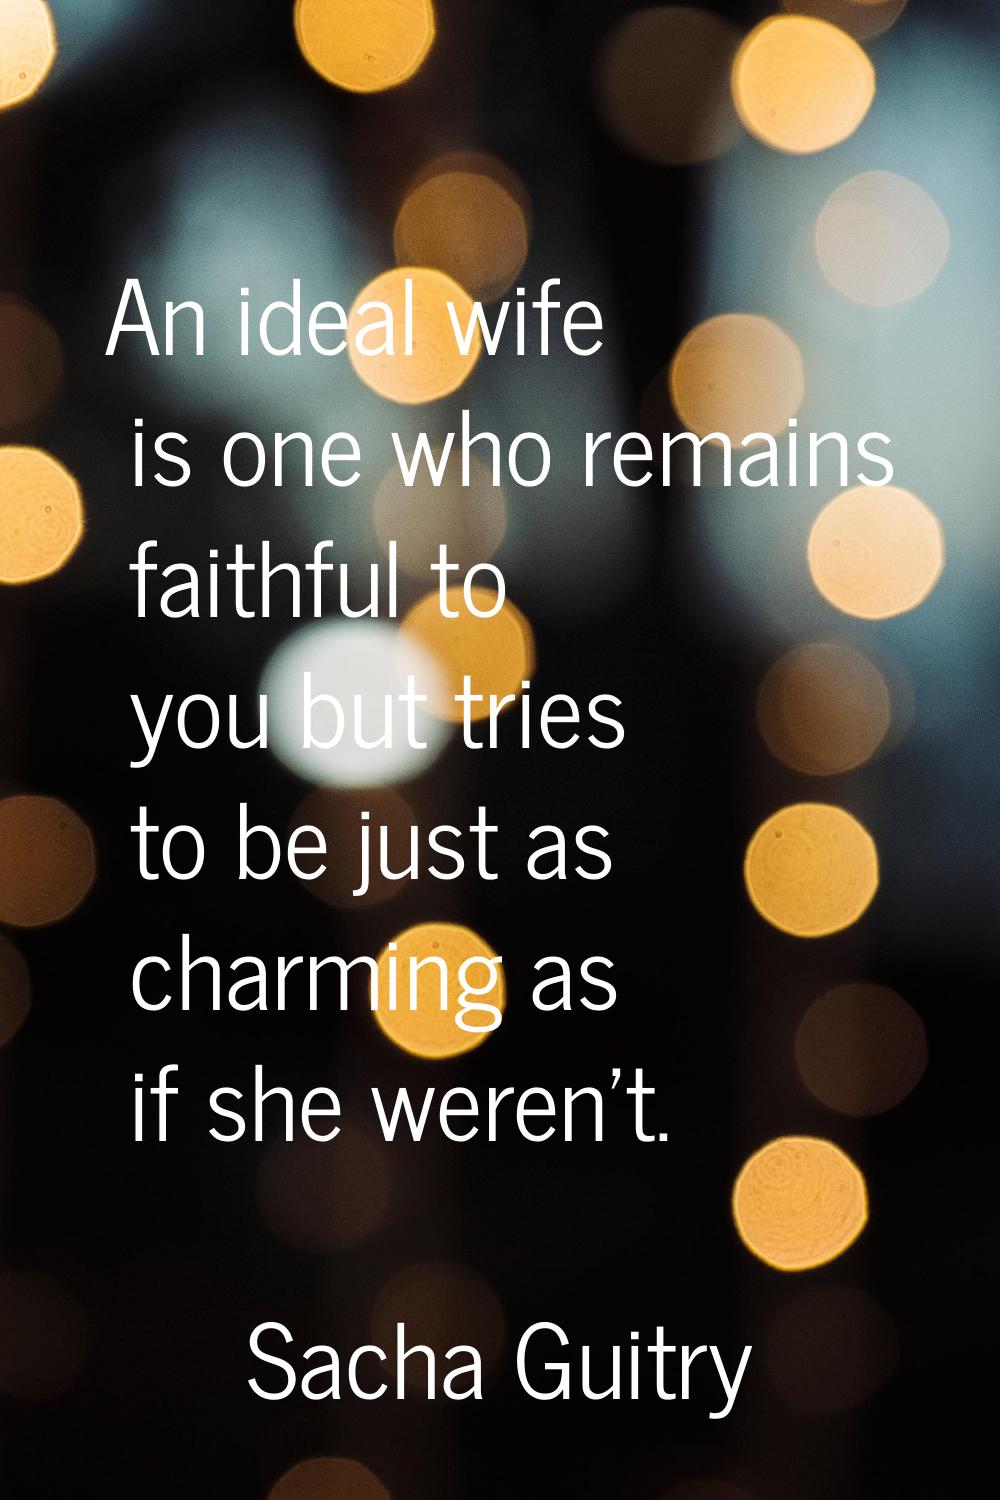 An ideal wife is one who remains faithful to you but tries to be just as charming as if she weren't